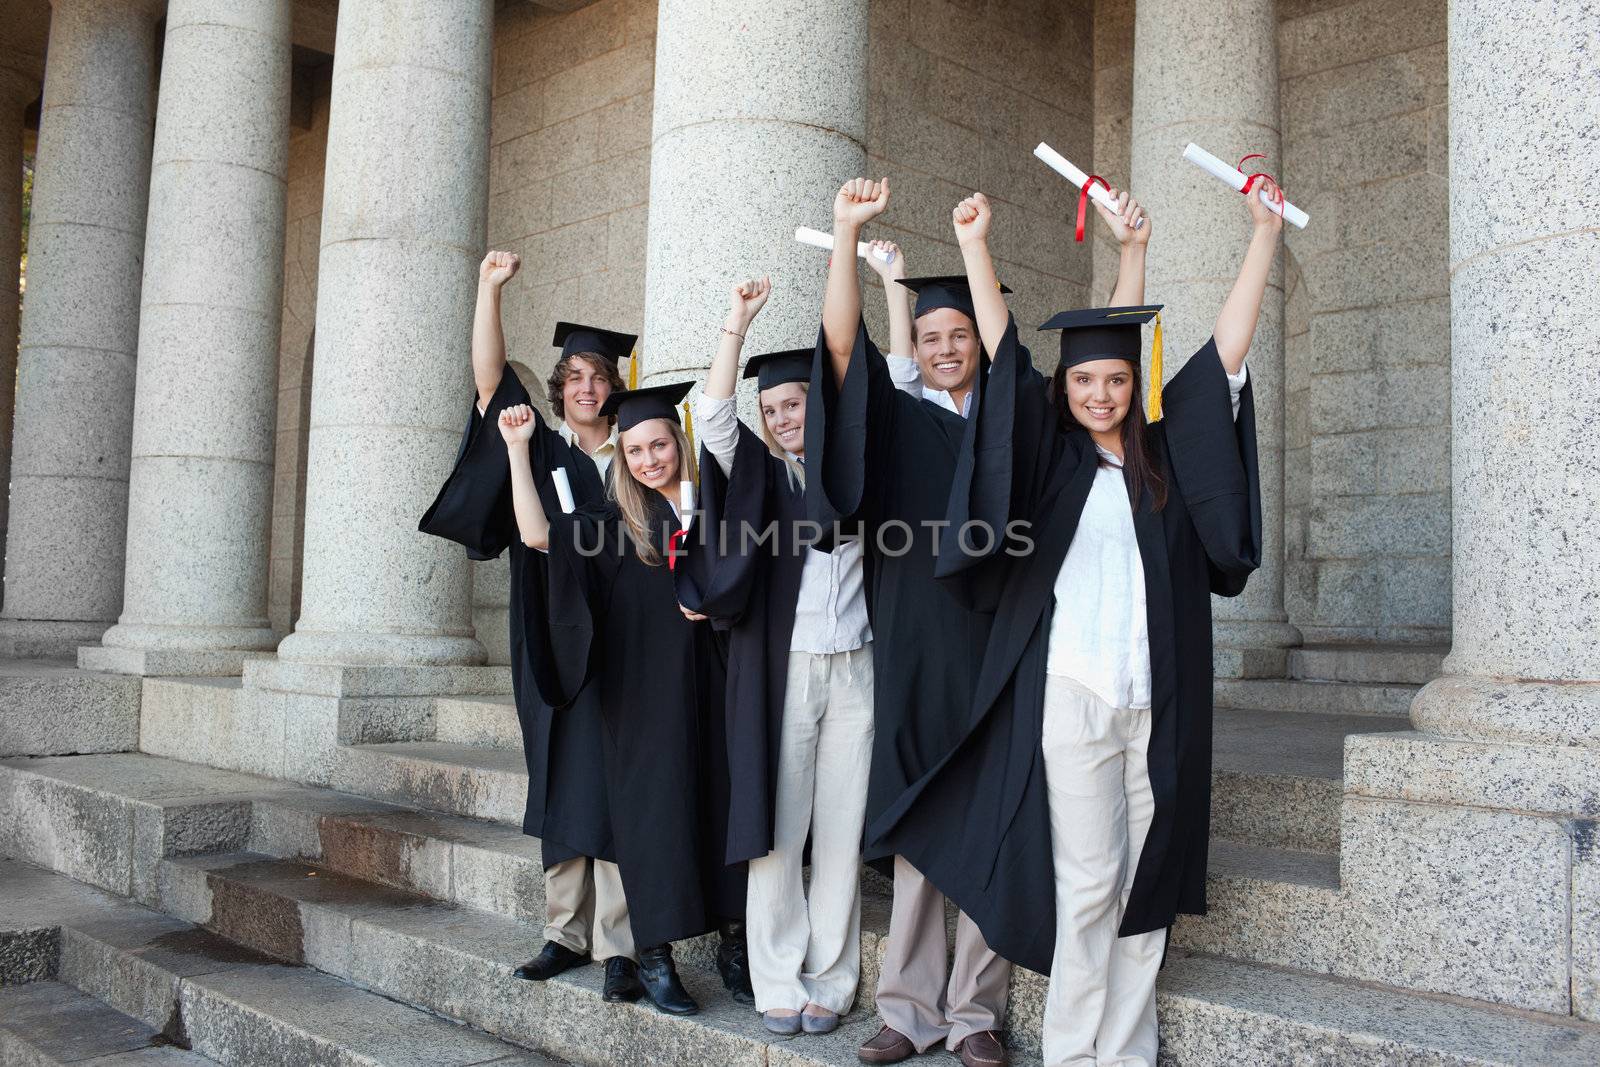 Five happy graduates posing the arms raised in front of the university